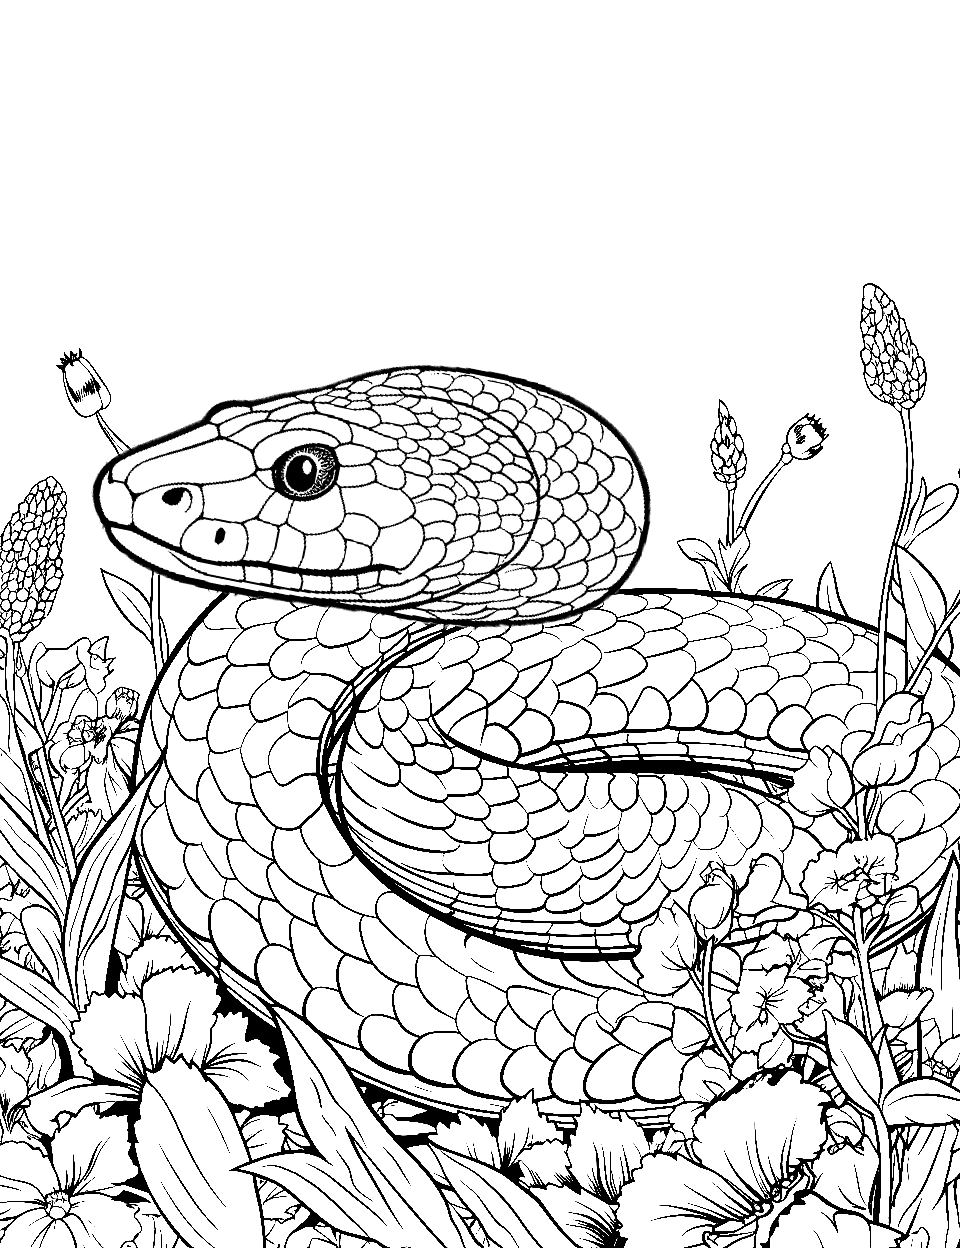 Small Garden Visitor Coloring Page - A small garter snake exploring a garden filled with flowers.